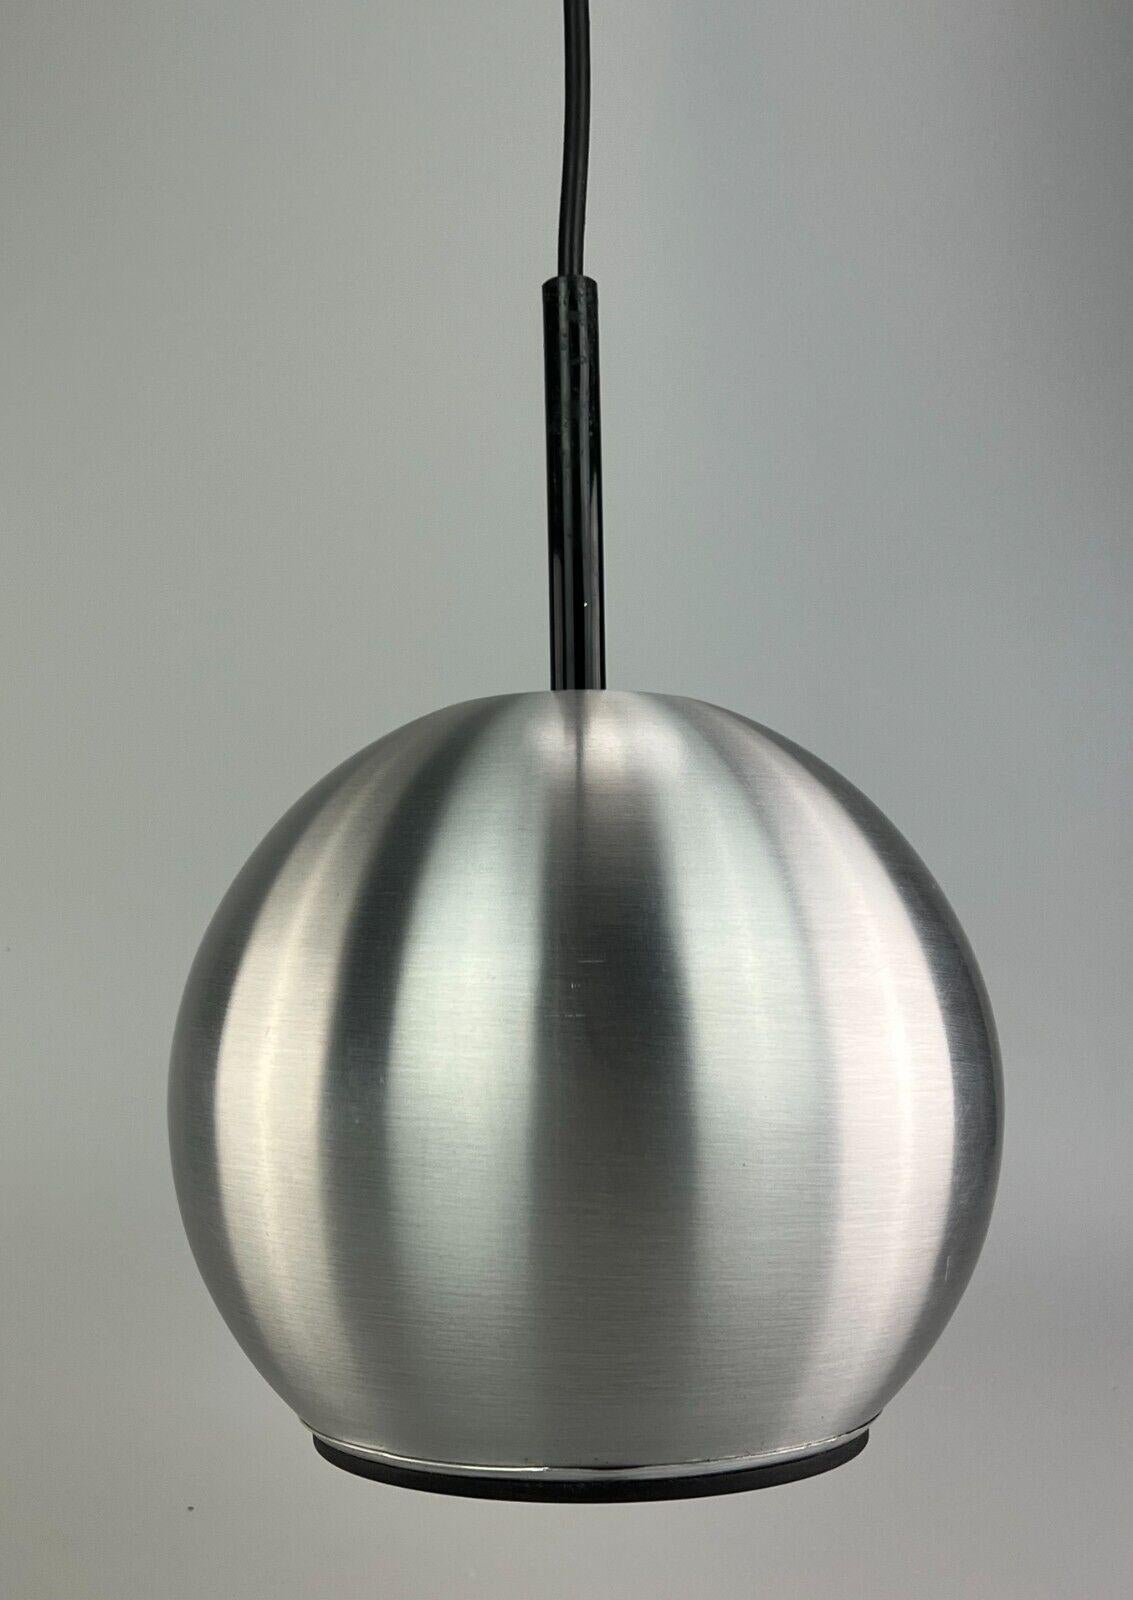 60s 70s Erco ceiling lamp ceiling light ball lamp metal aluminum

Object: ceiling lamp

Manufacturer: Erco

Condition: good - vintage

Age: around 1960-1970

Dimensions:

Diameter = 21cm
Height = 30cm

Other notes:

The pictures